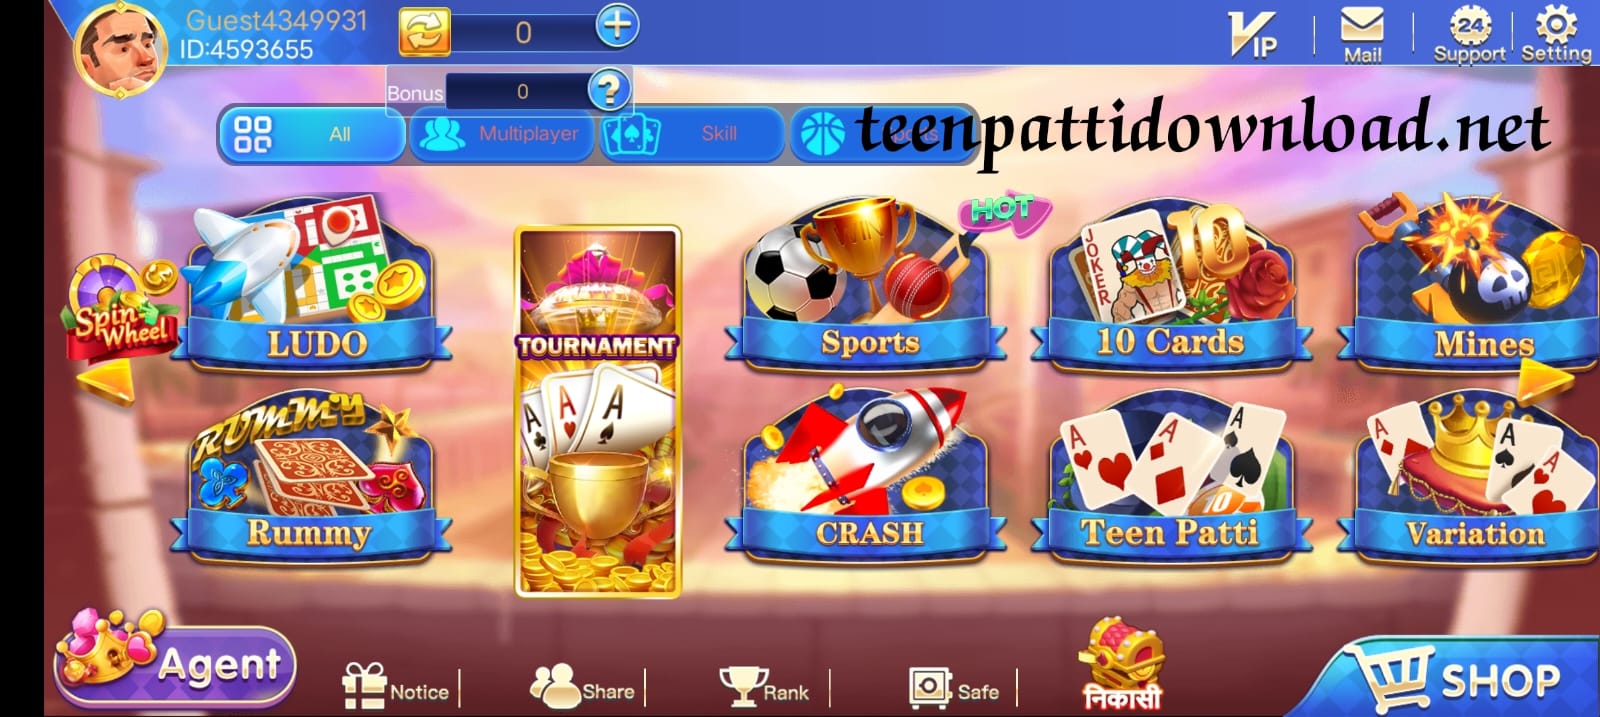 Available Games On Teen Patti Party App